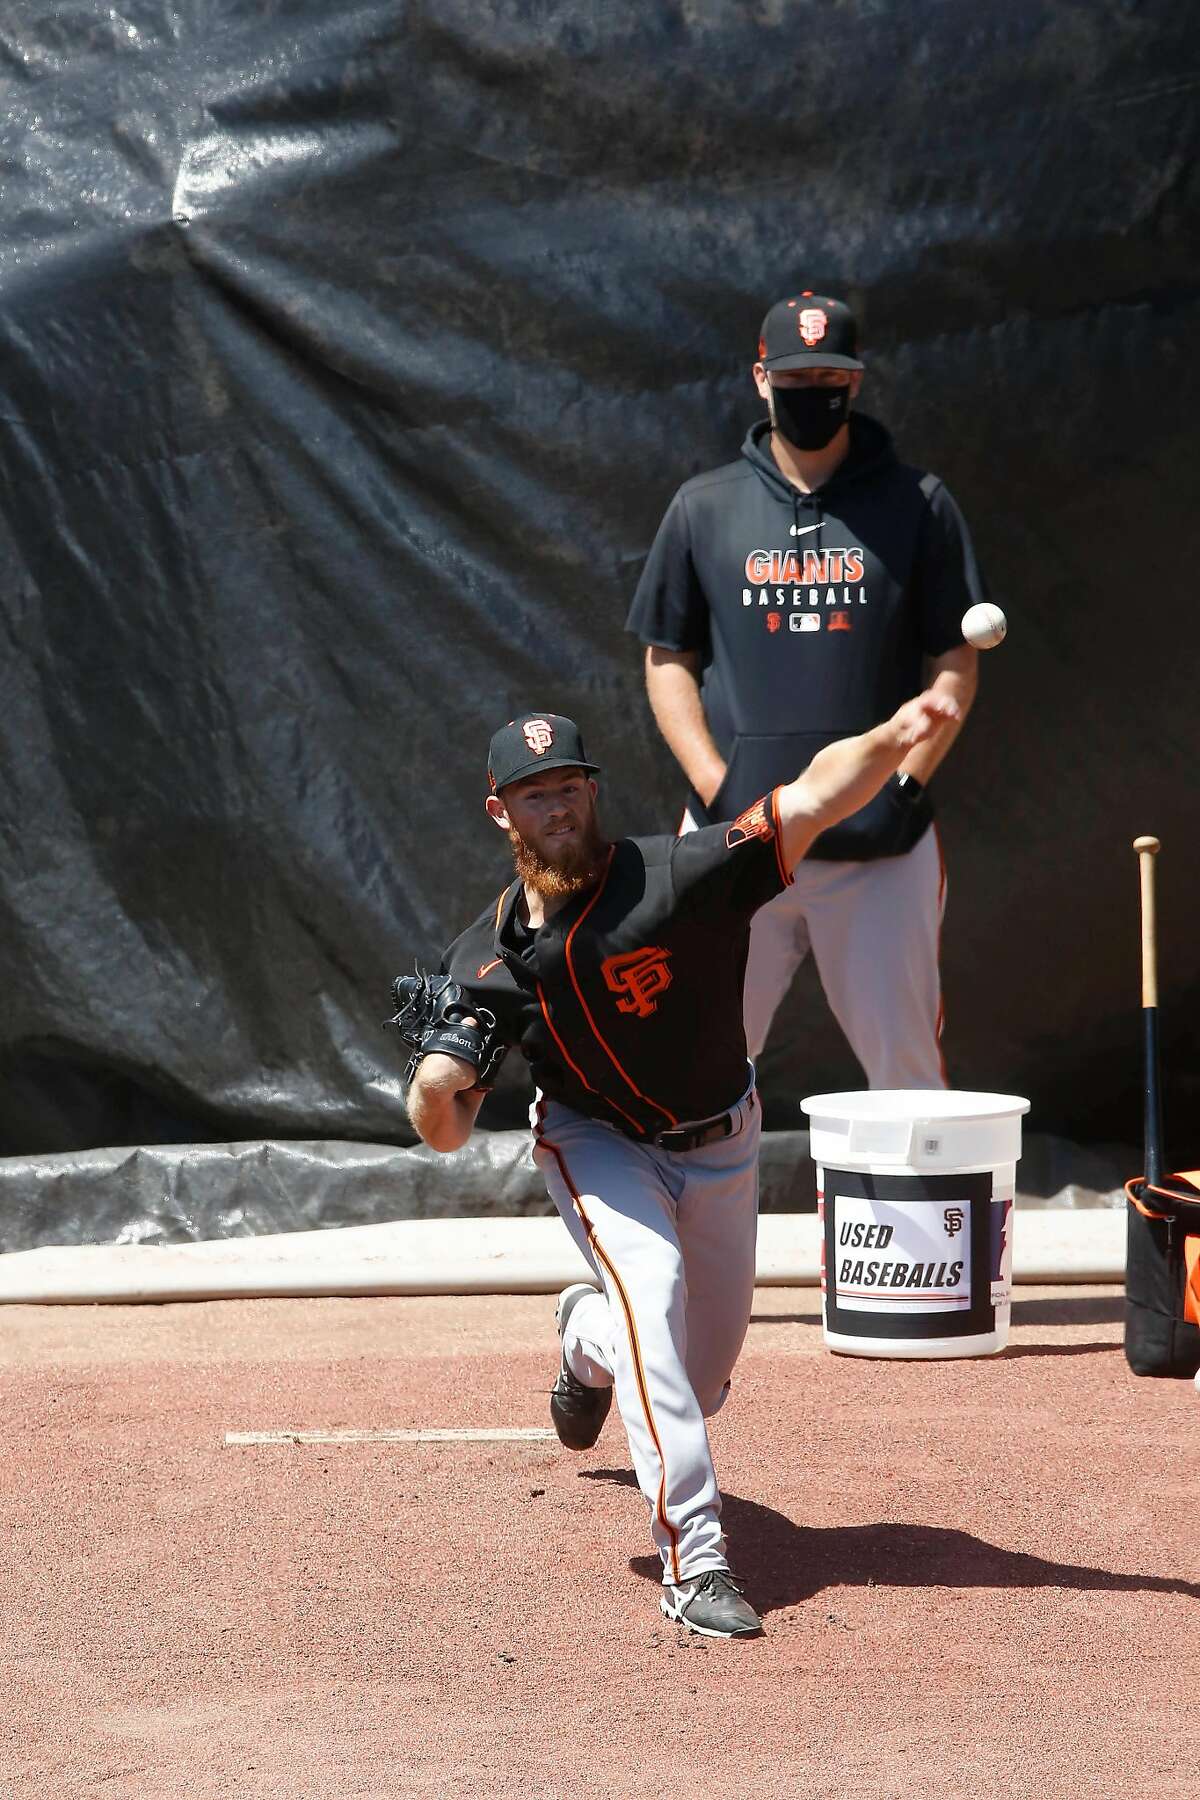 Conner Menez (front) of the San Franciosco Giants pitches in the bullpen during practice at Oracle Park on Monday, July 13, 2020 in San Francisco, Calif.